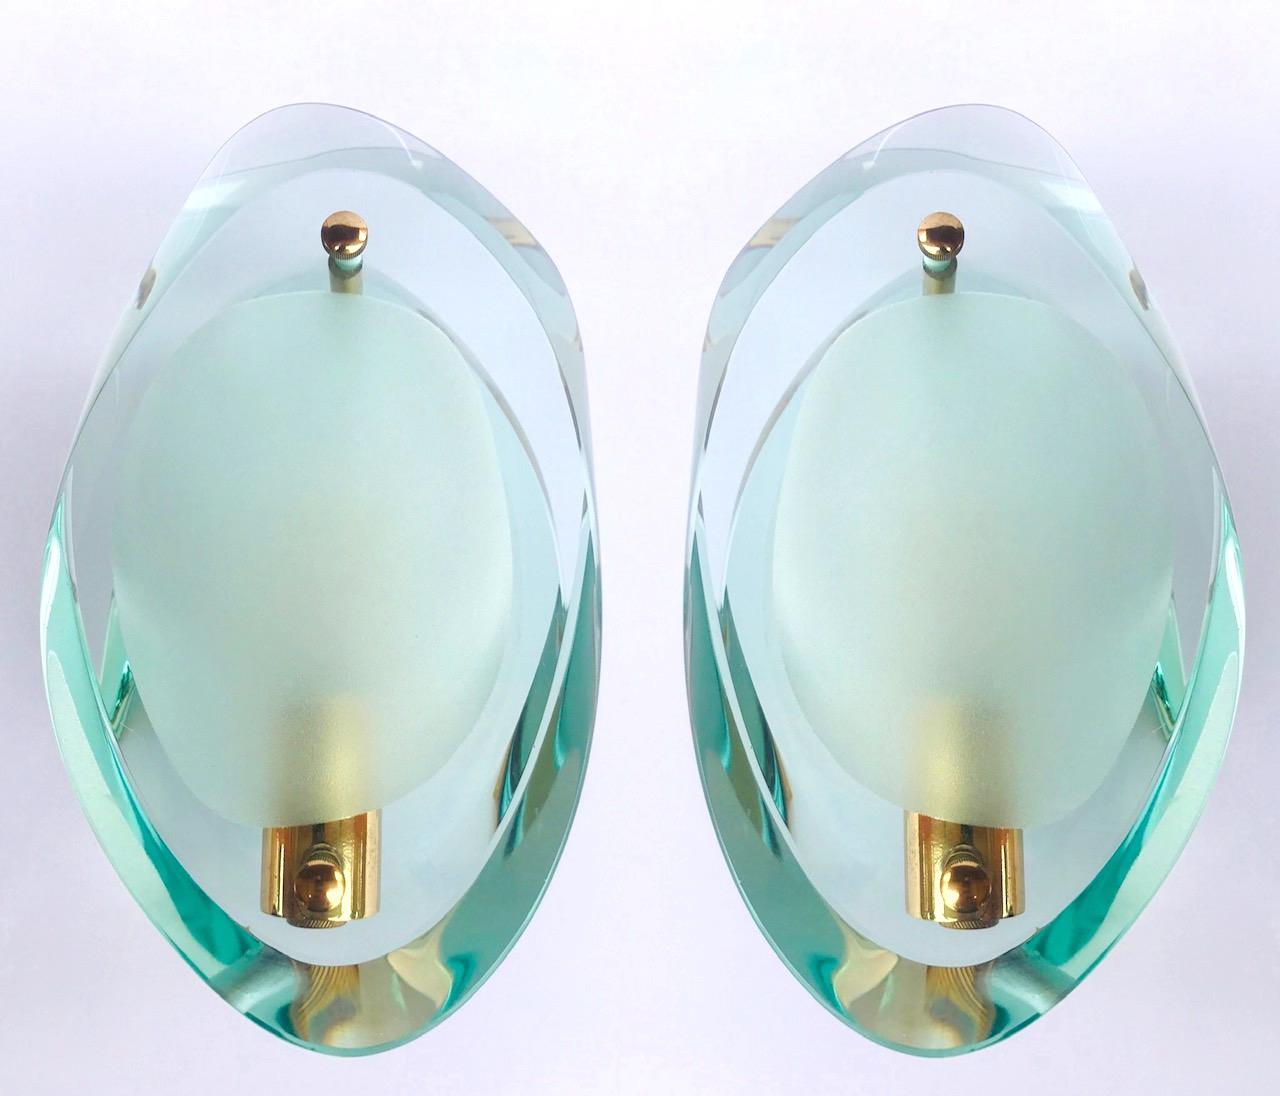 Stunning pair of Italian Mid-Century Modern Murano glass sconces. Sconces are fitted with thick beveled glass plates with organic forms. The translucent jeweled glass has a green colored cast featuring sandblasted centers and polished edges. Sconces